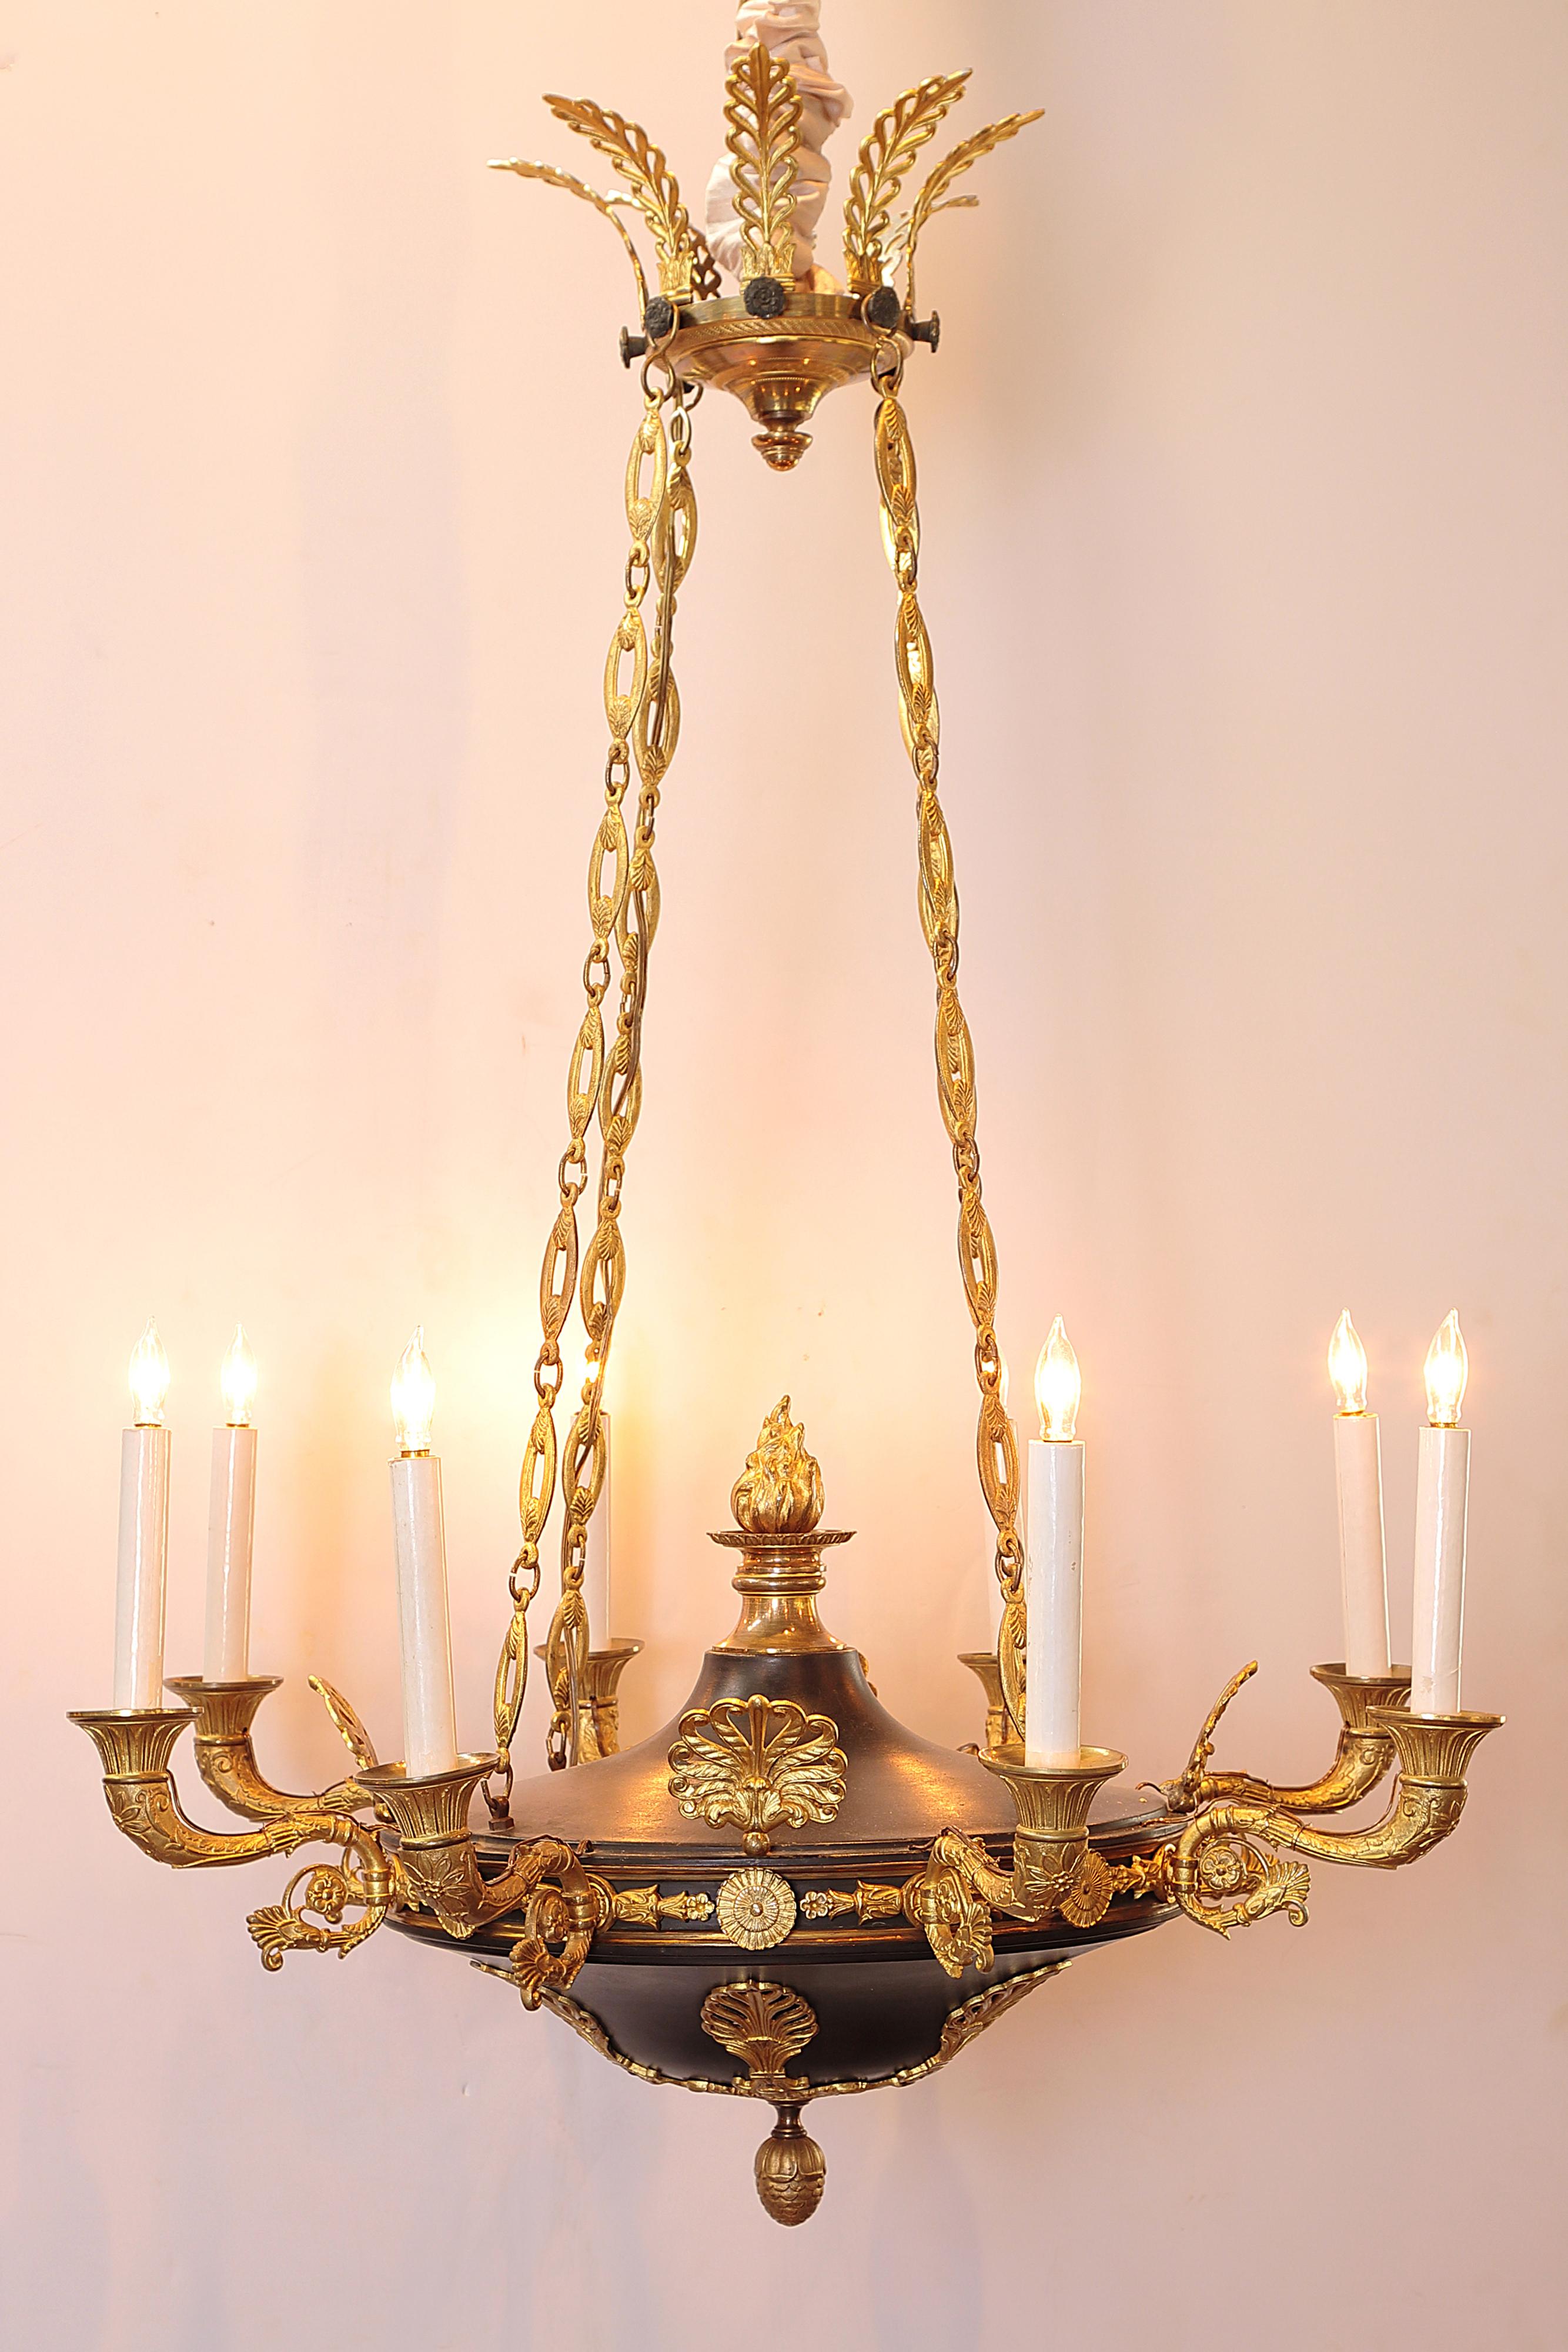 A Charles X gilt and Patinated bronze eight-light chandelier. This fixture features a feathered canopy with four chains holding the bowl and eight (8) curving arms with gilt fan forms between each. Flame finial on the upper portion, an acorn finial